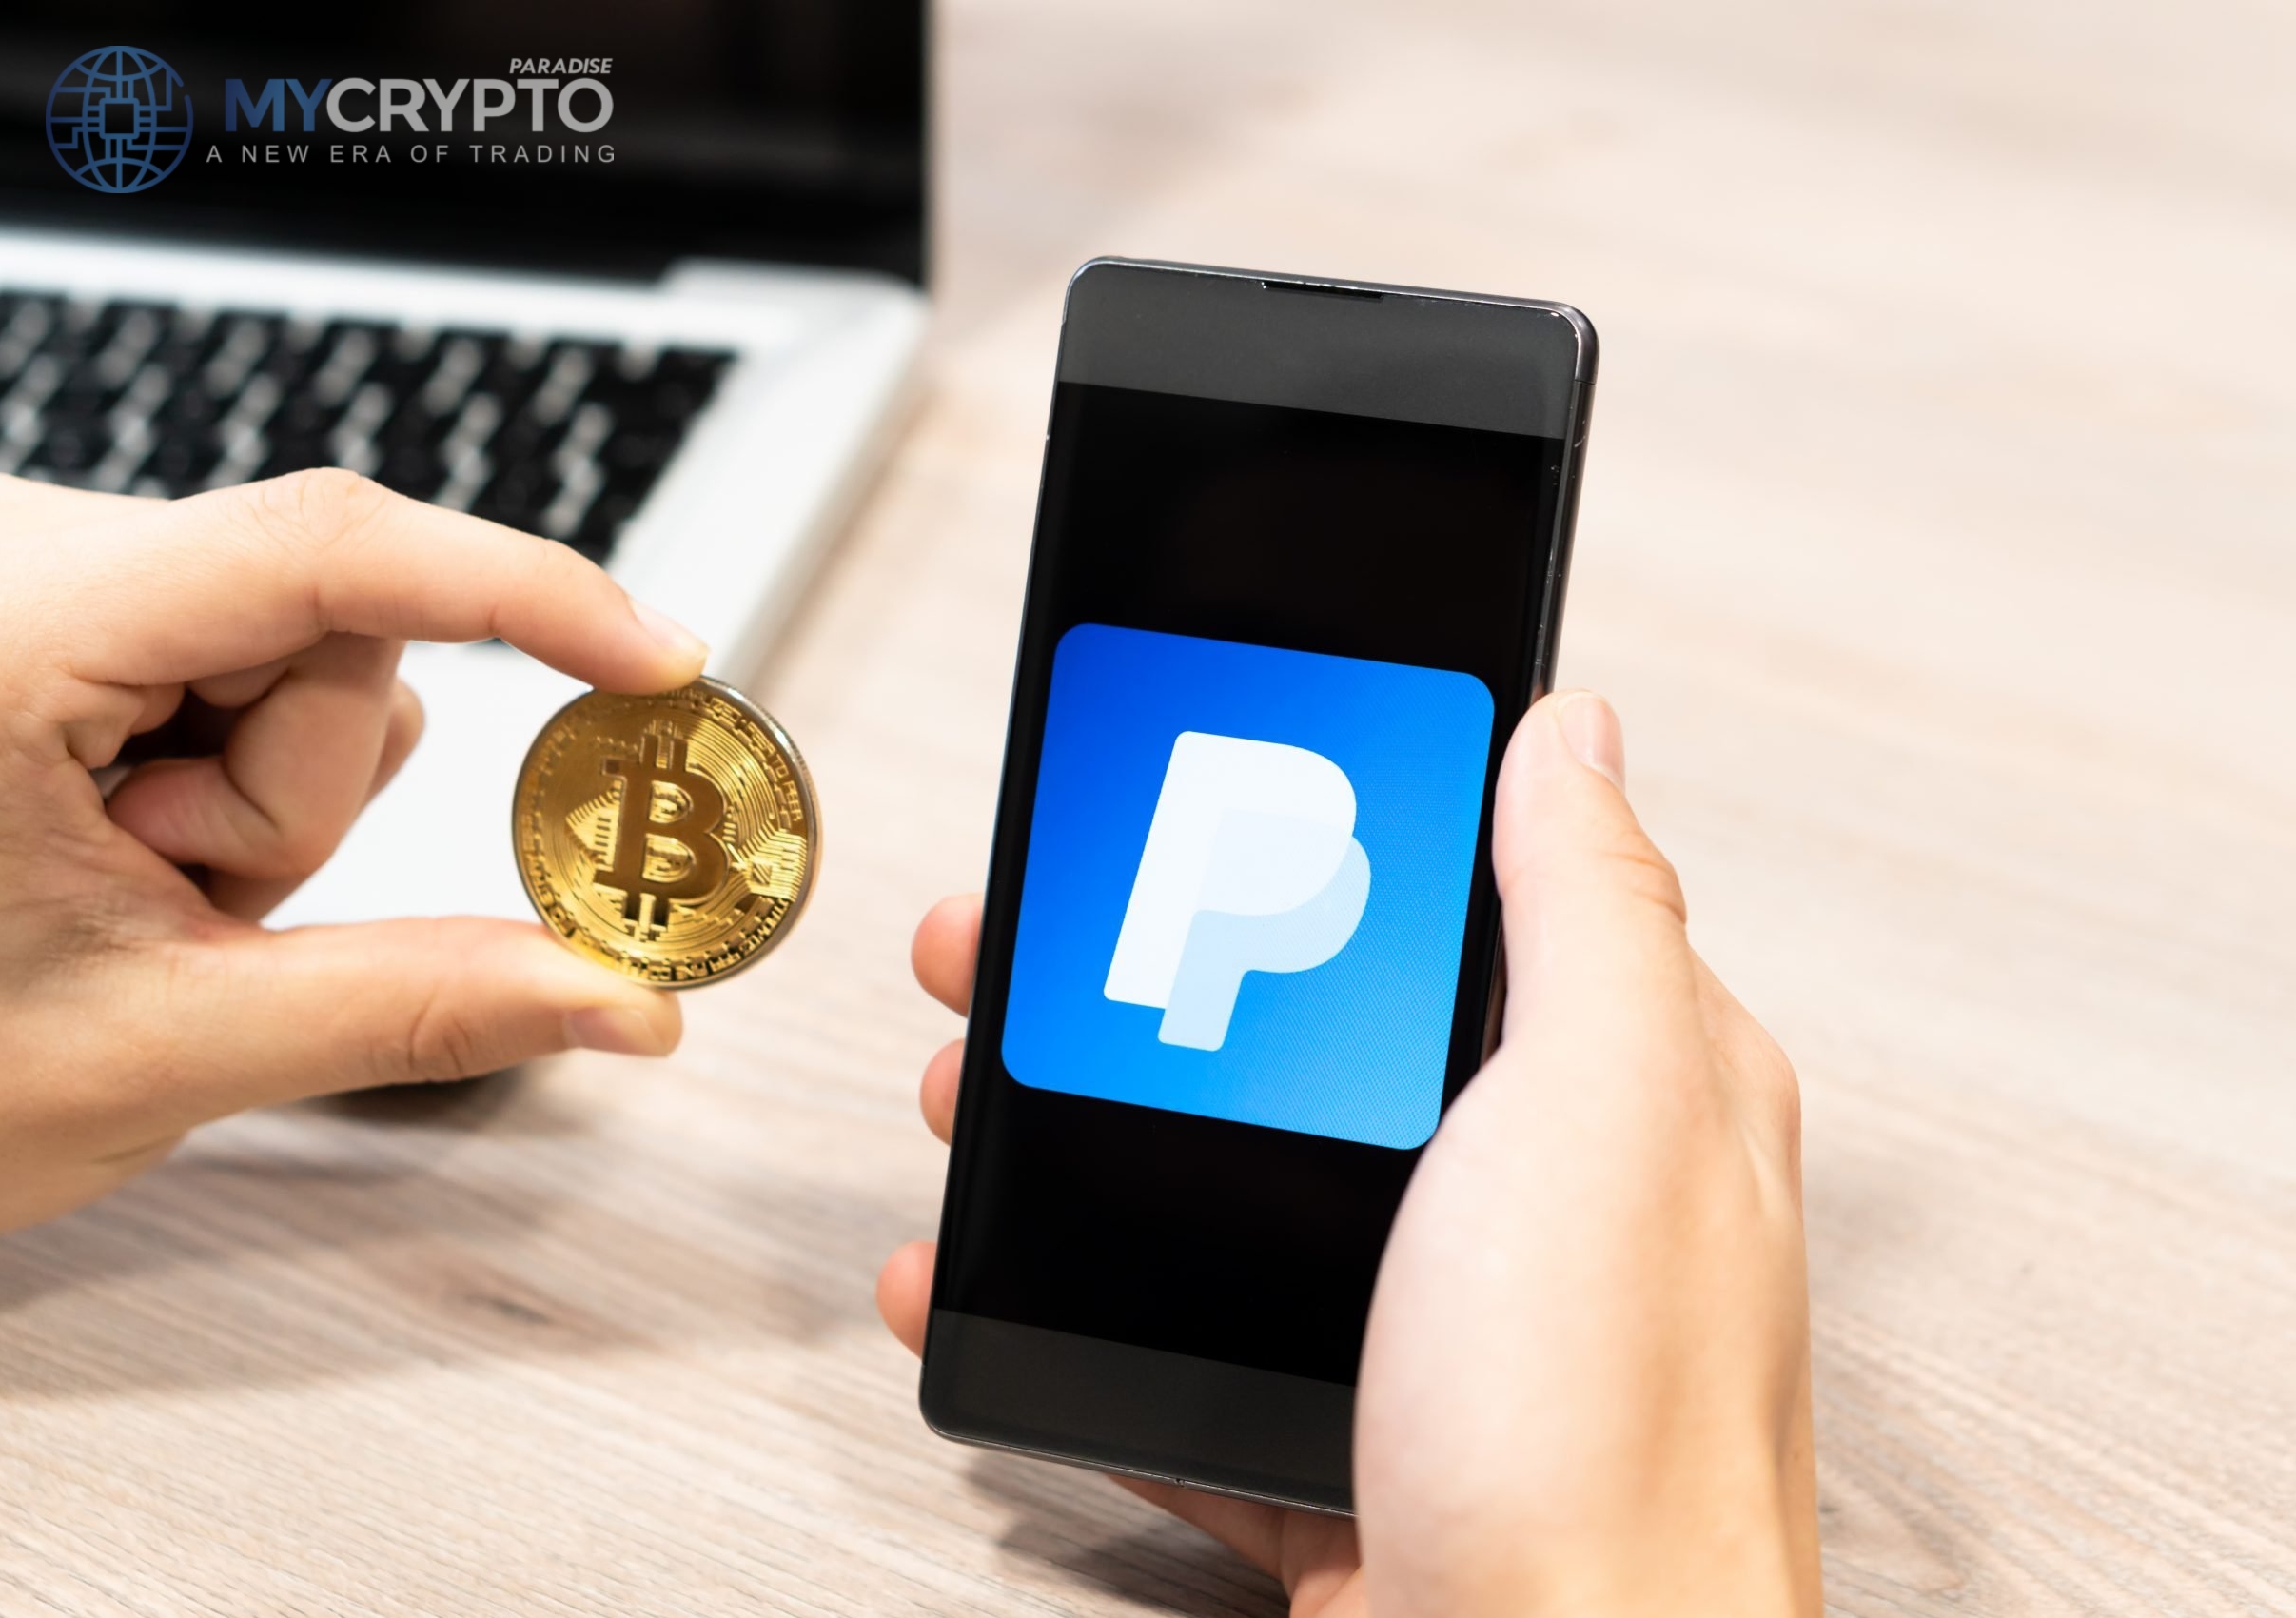 PayPal Upgrades its Crypto Services to Allowing Token Transfer